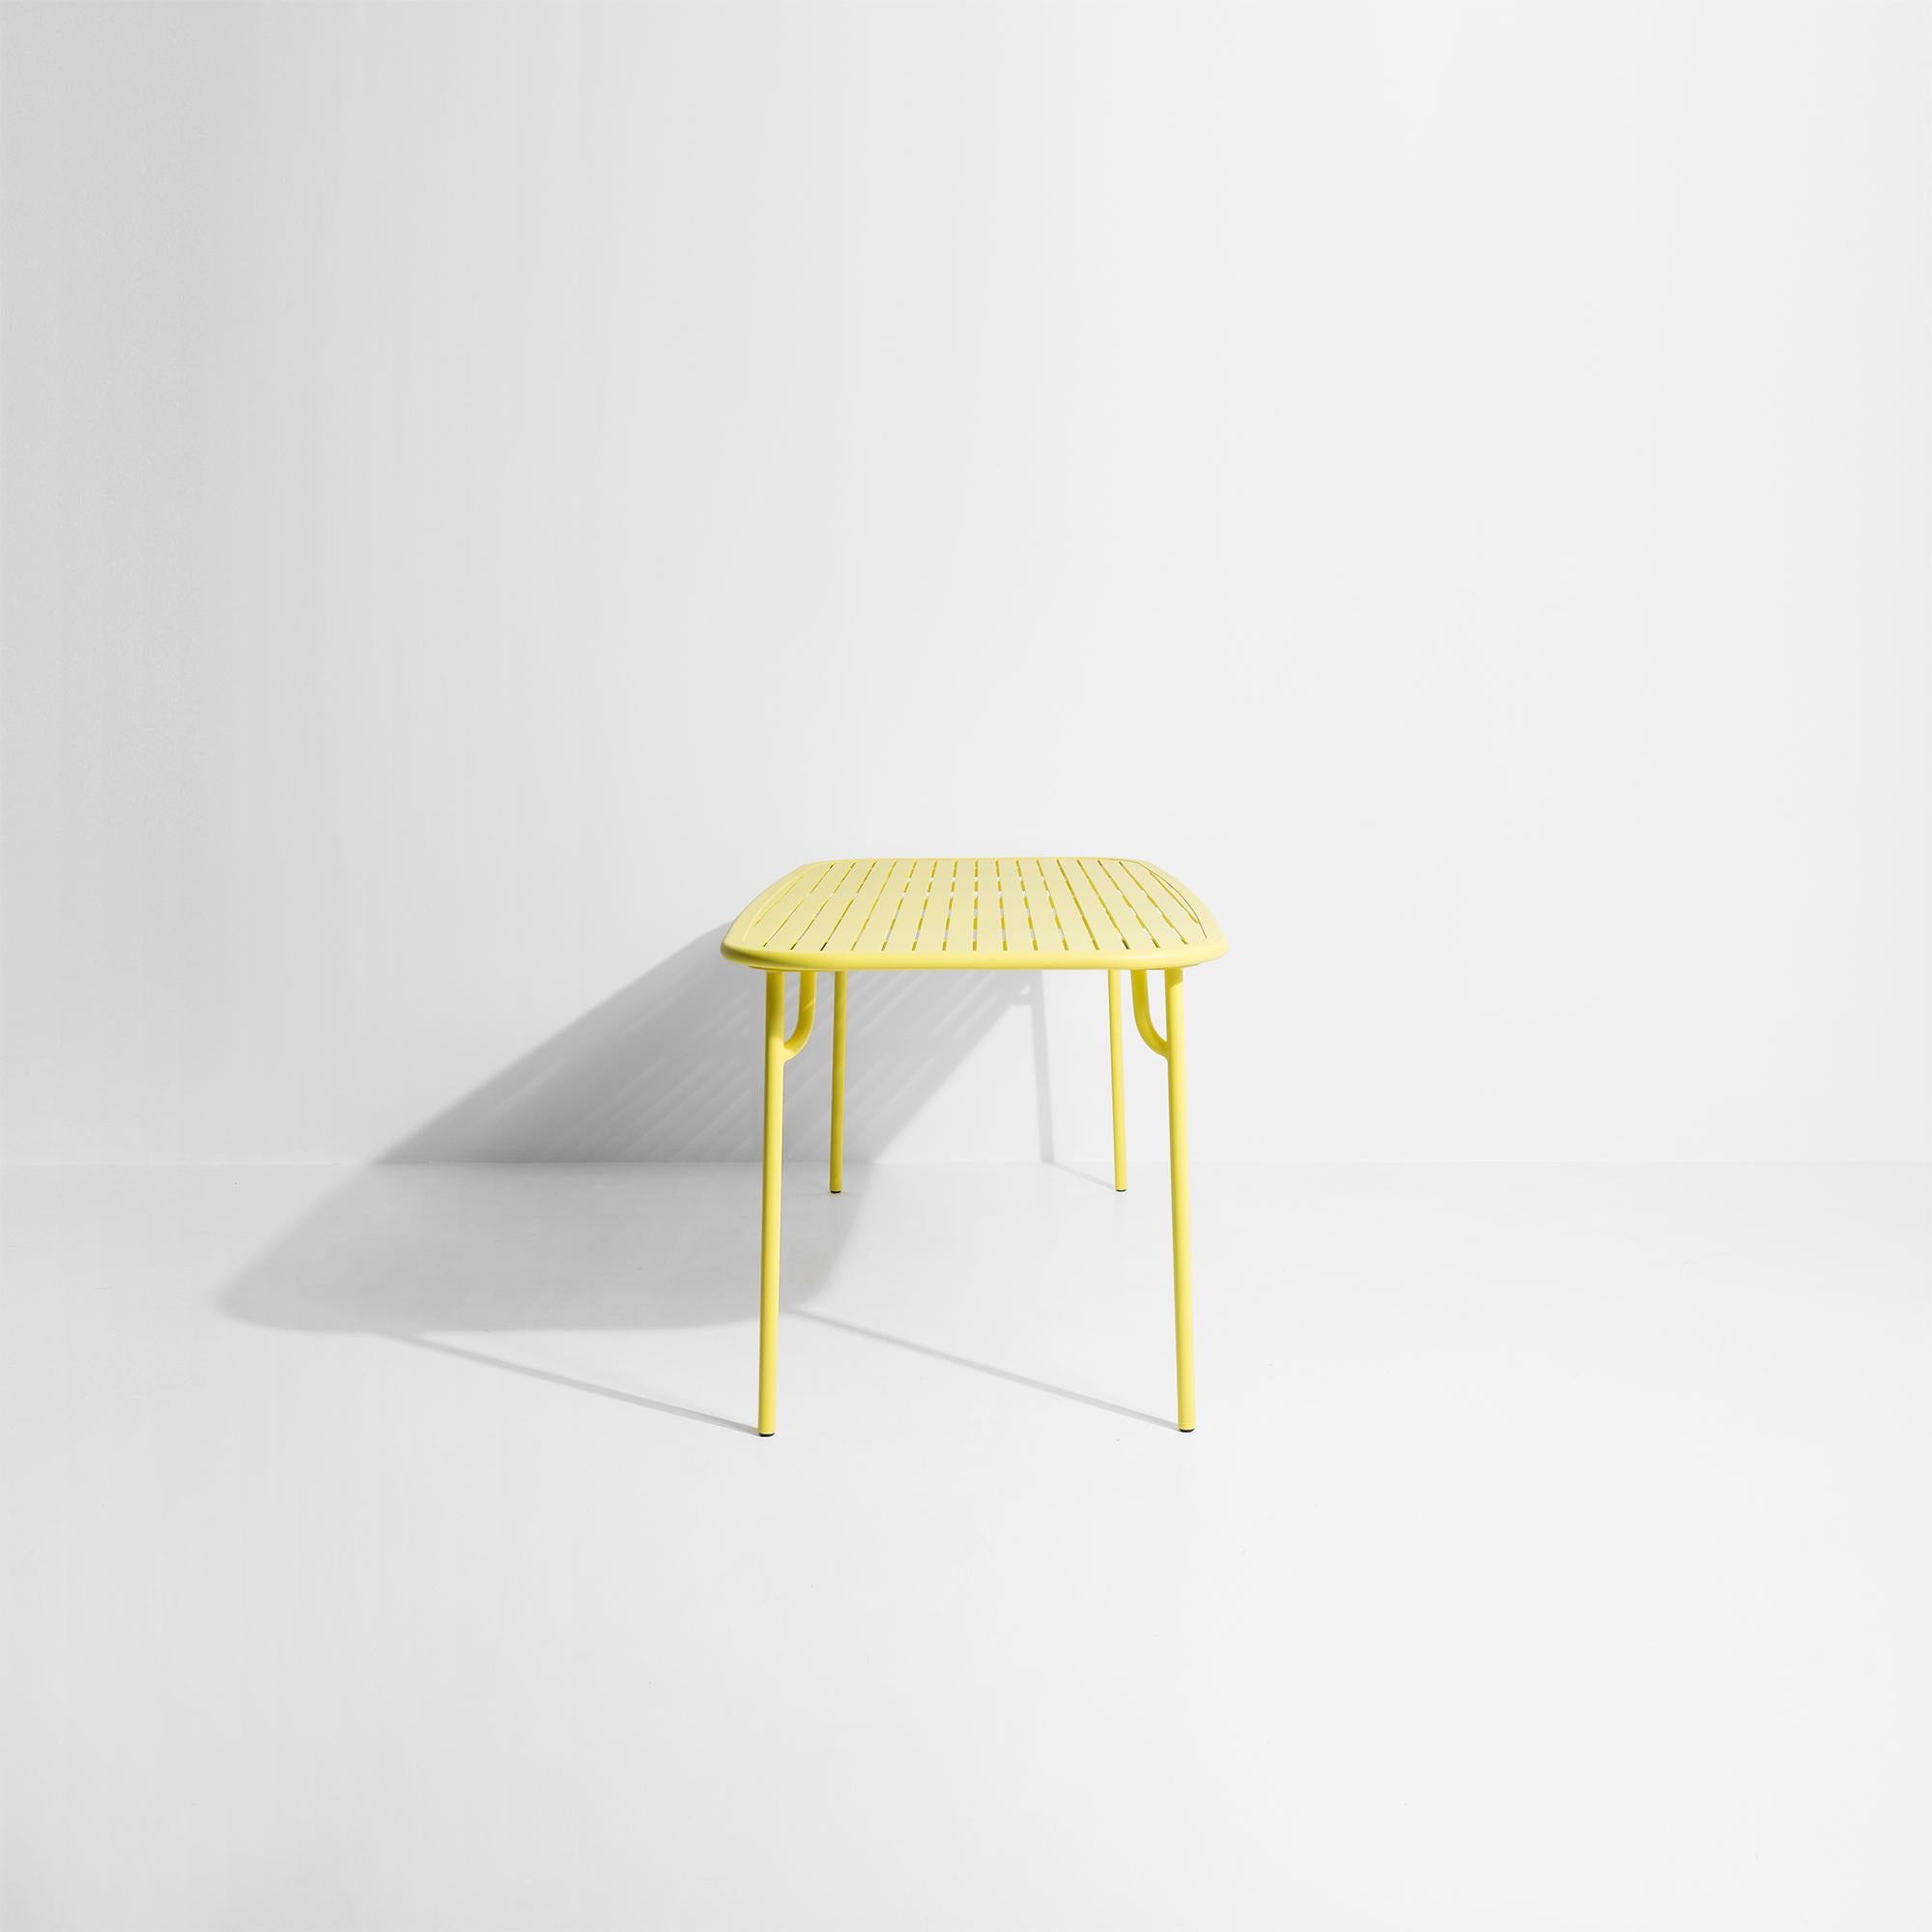 Chinese Petite Friture Week-End Medium Rectangular Dining Table in Yellow with Slats For Sale